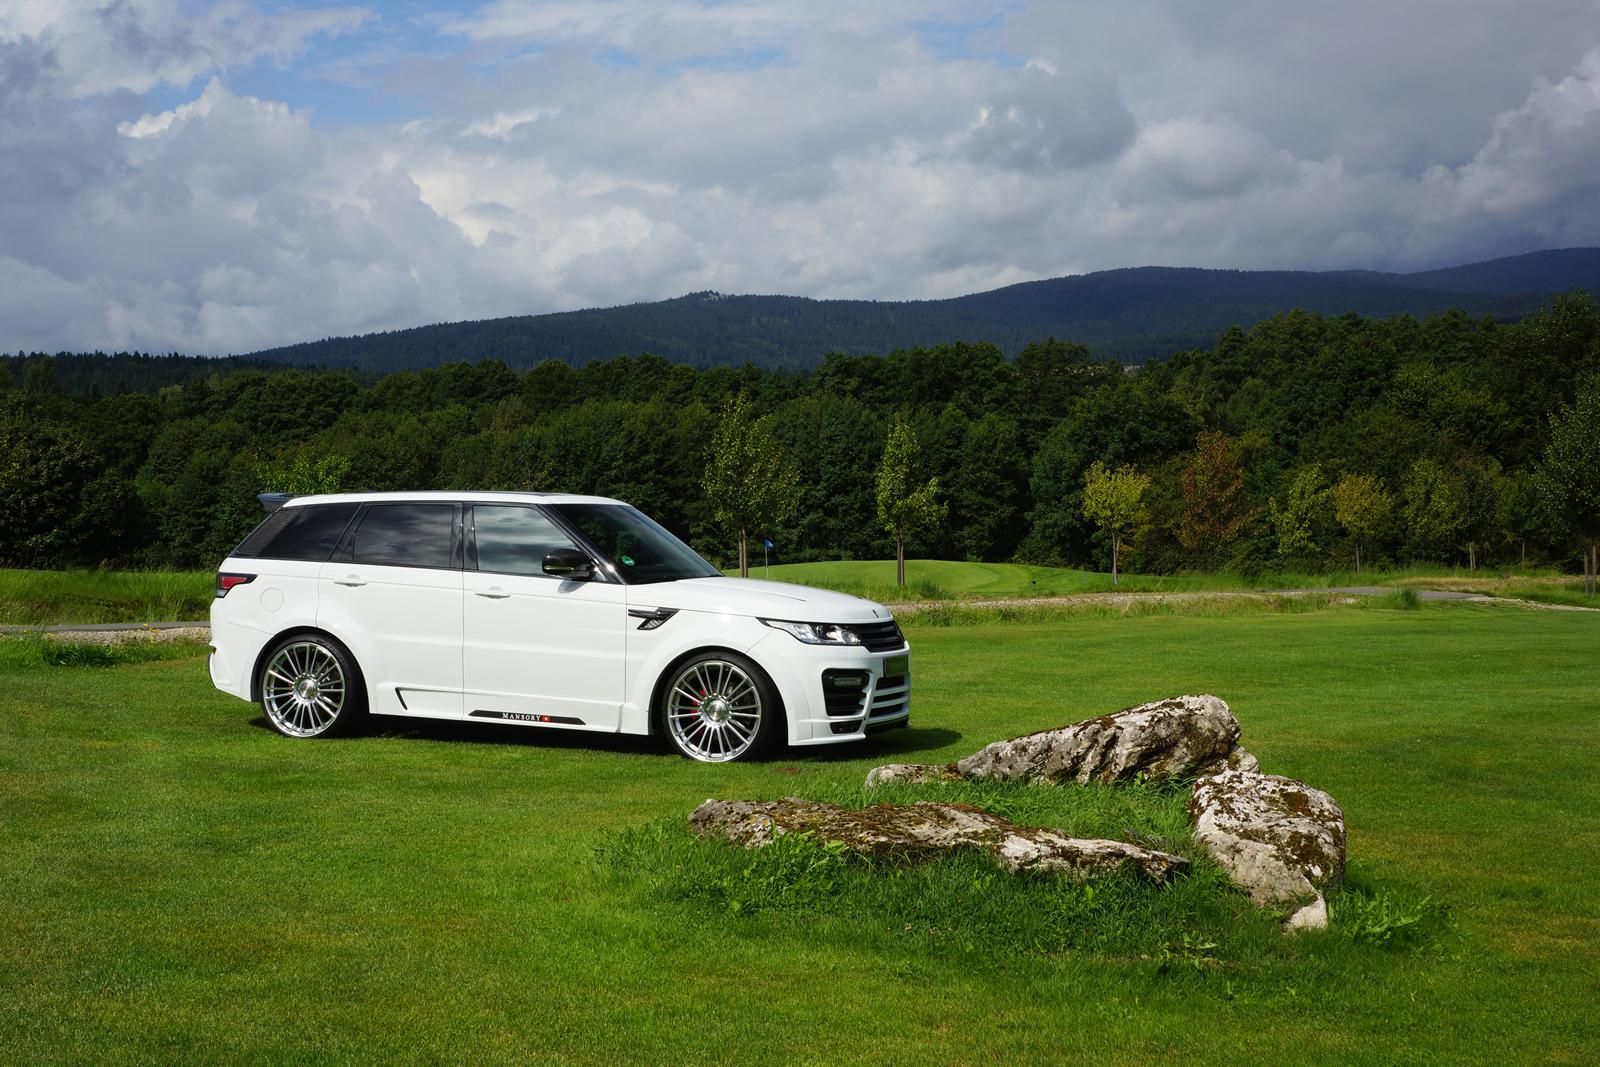 2014 Land Rover Range Rover Sport by Mansory